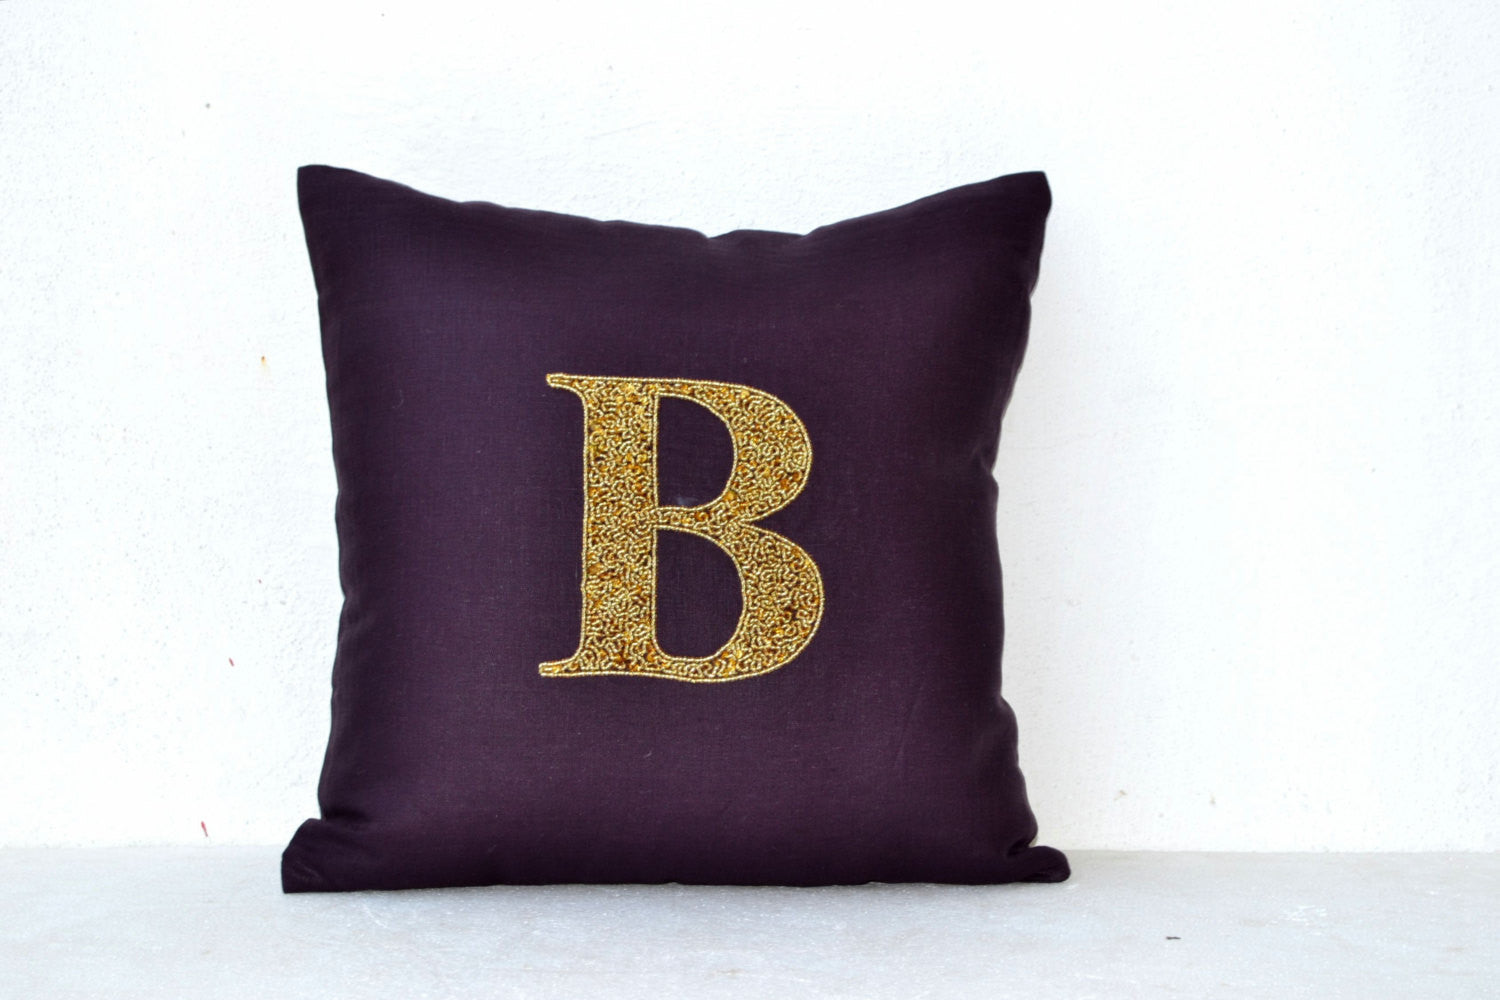 Handmade linen pillows with gold sequin and monogram